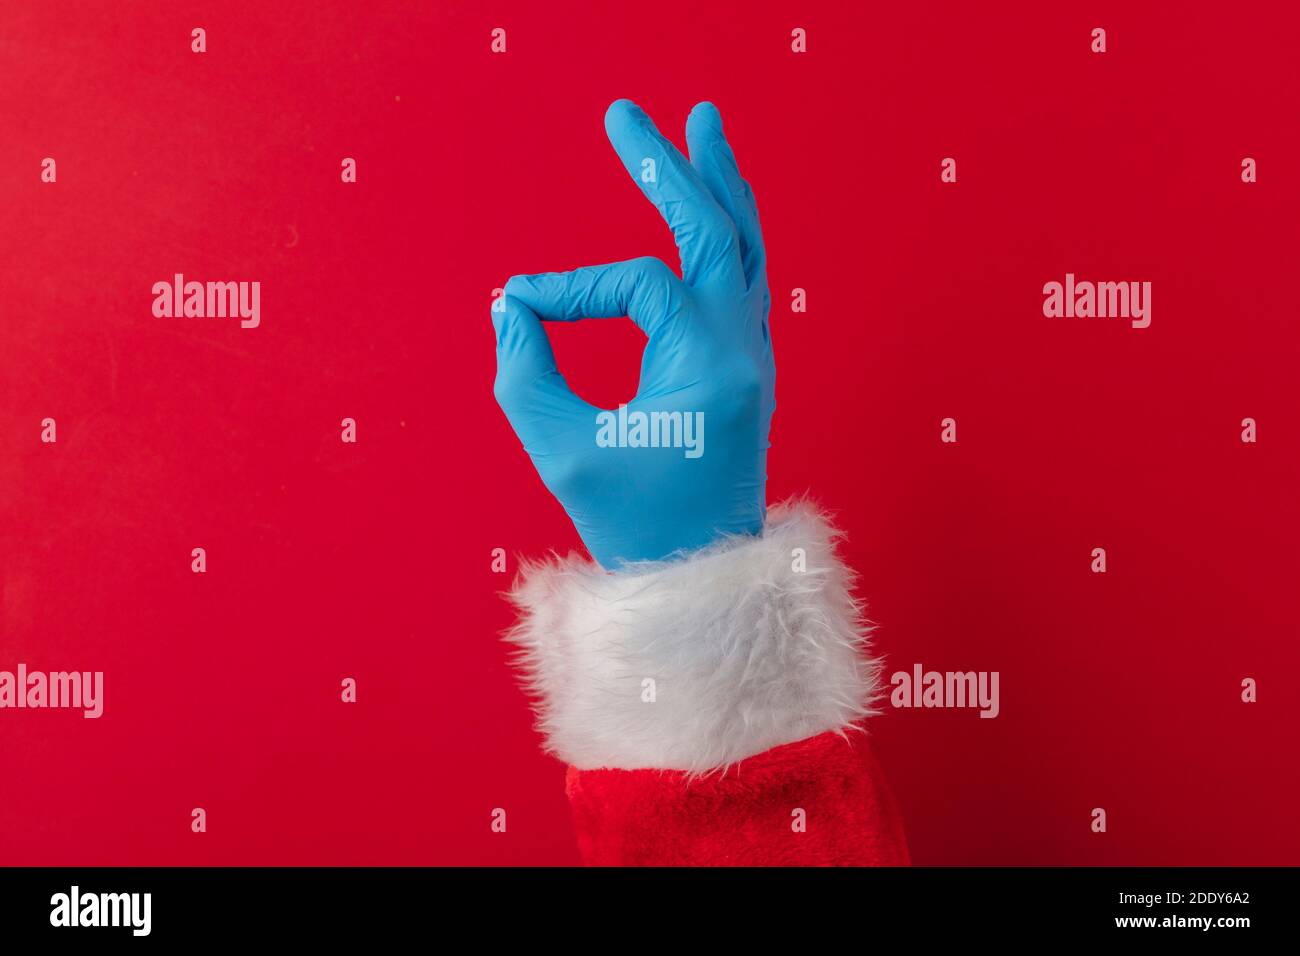 Santa hands wearing blue PPE protective gloves making OK hand gesture Stock Photo